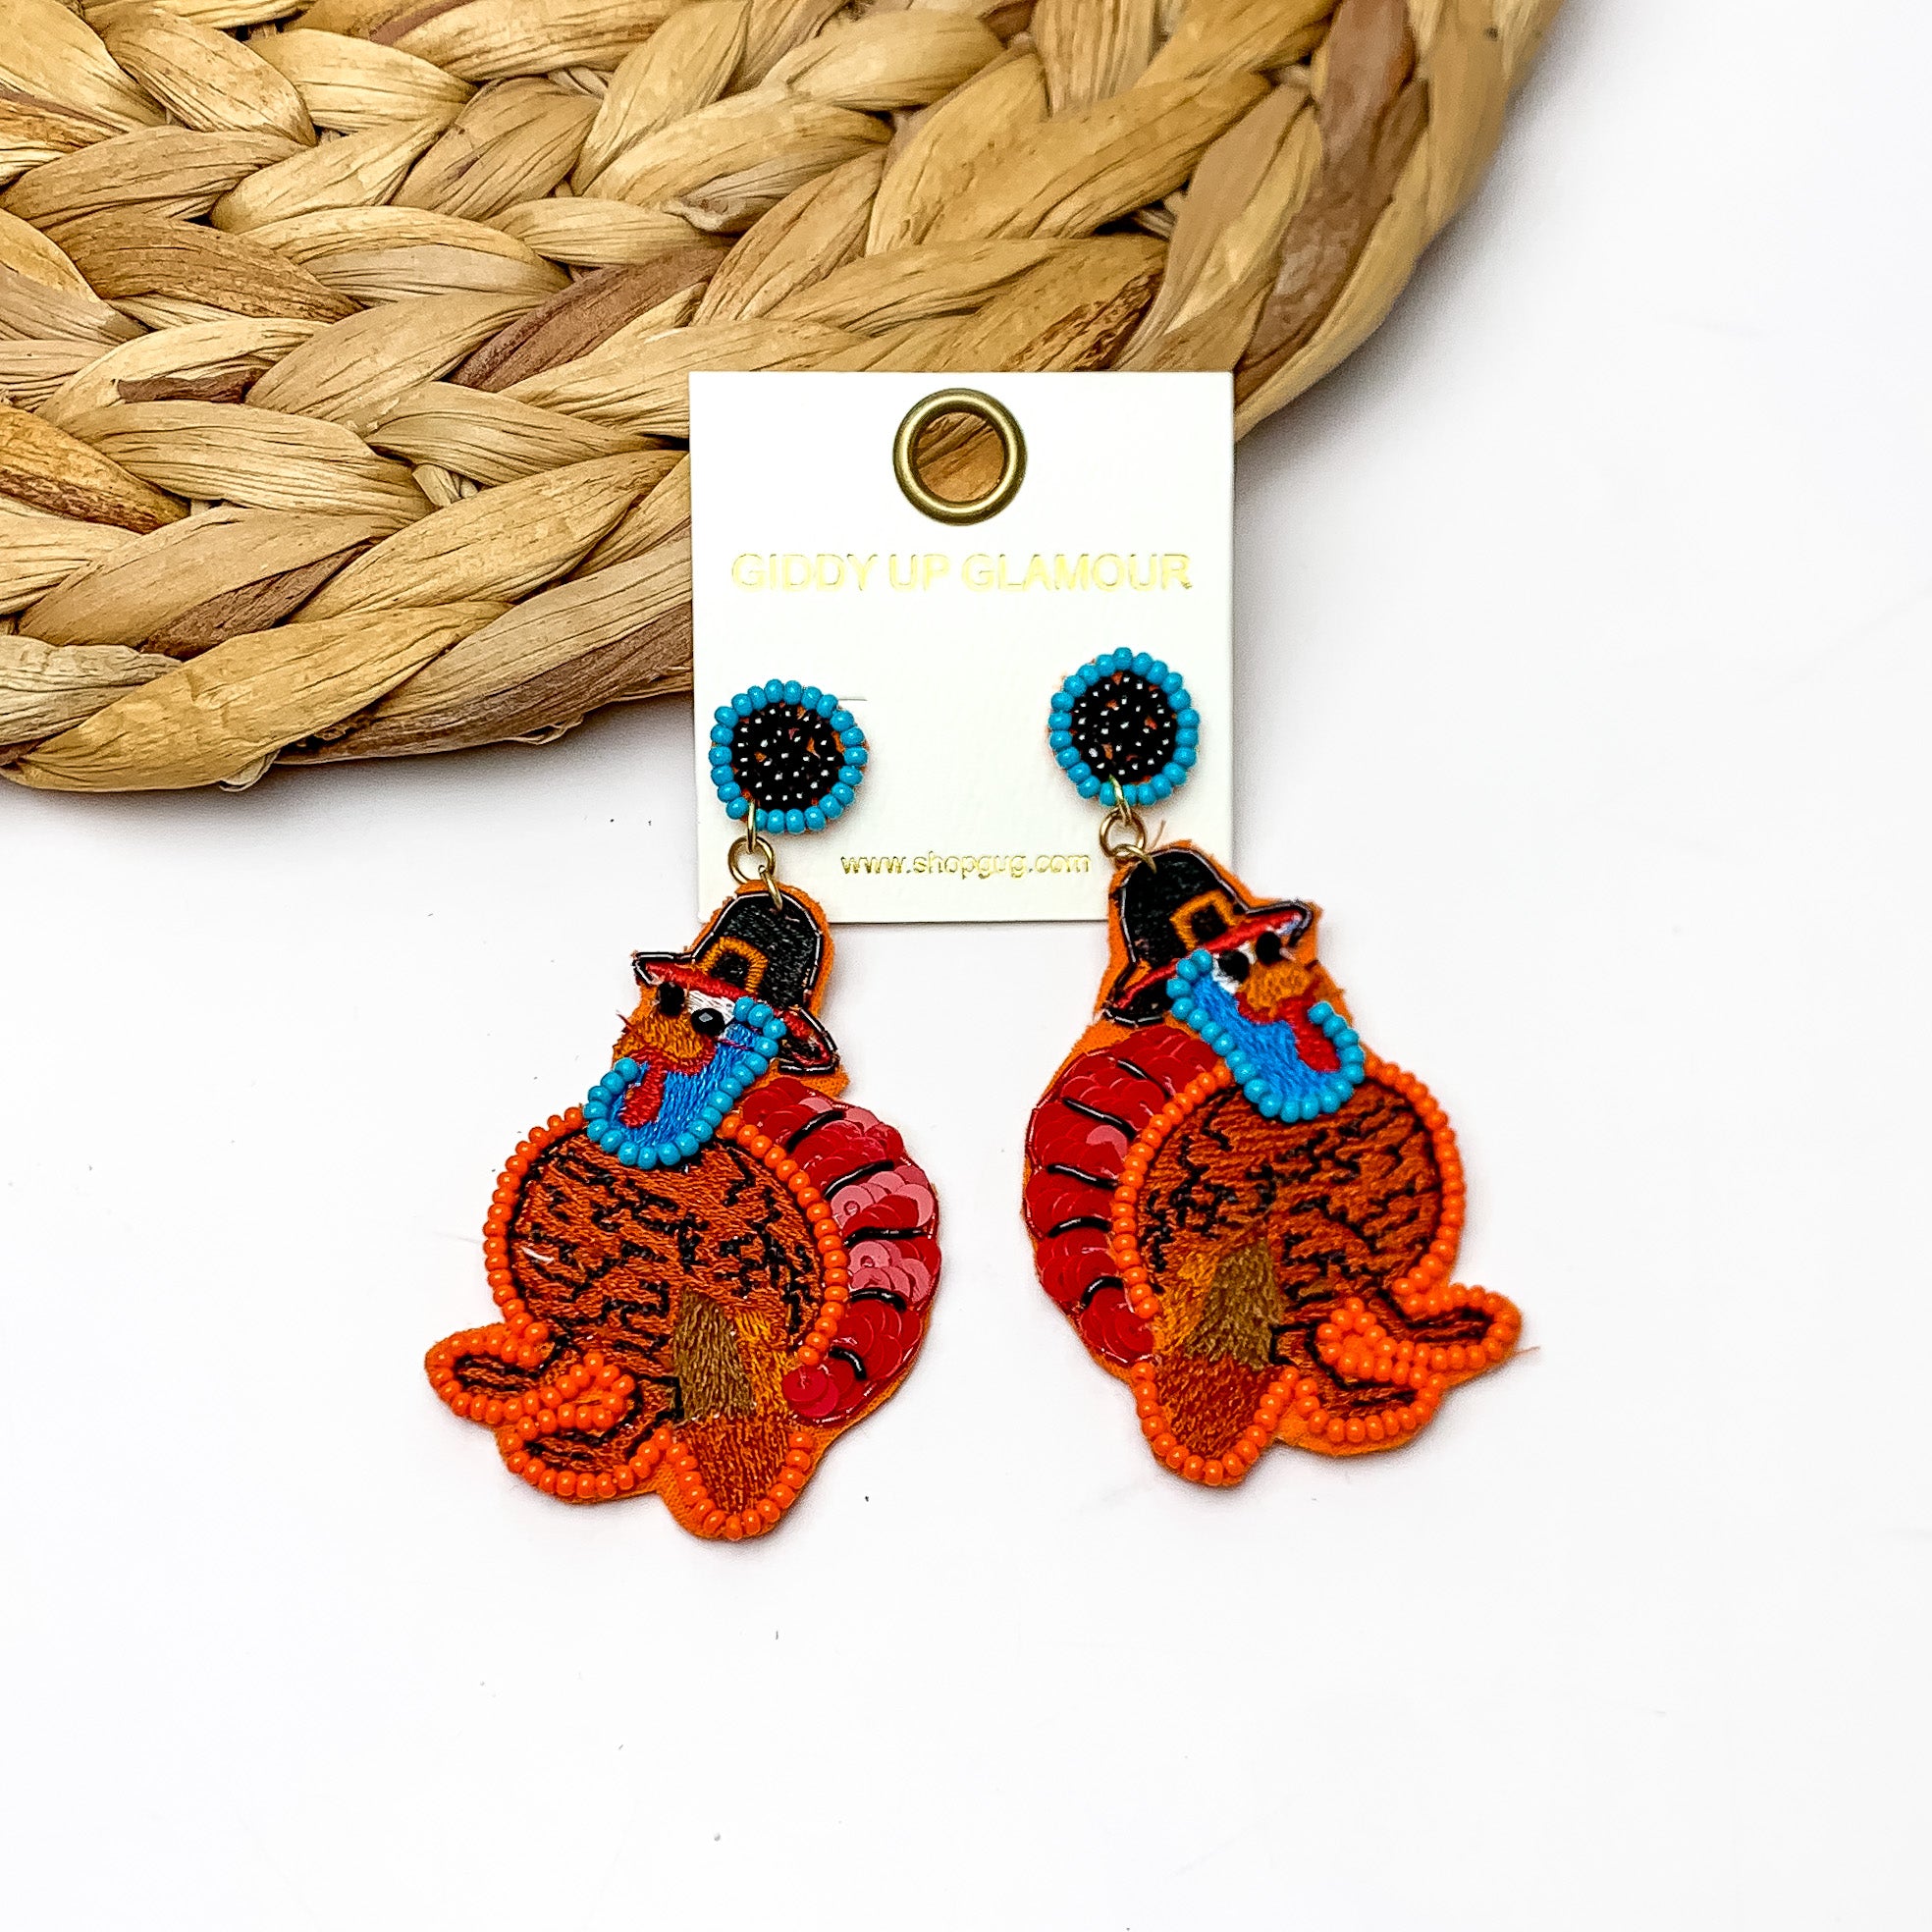 Fall Time Beaded Turkey Earrings in Brown, Red, and Orange. Pictured on a white background with the earrings laying against a wicker piece.